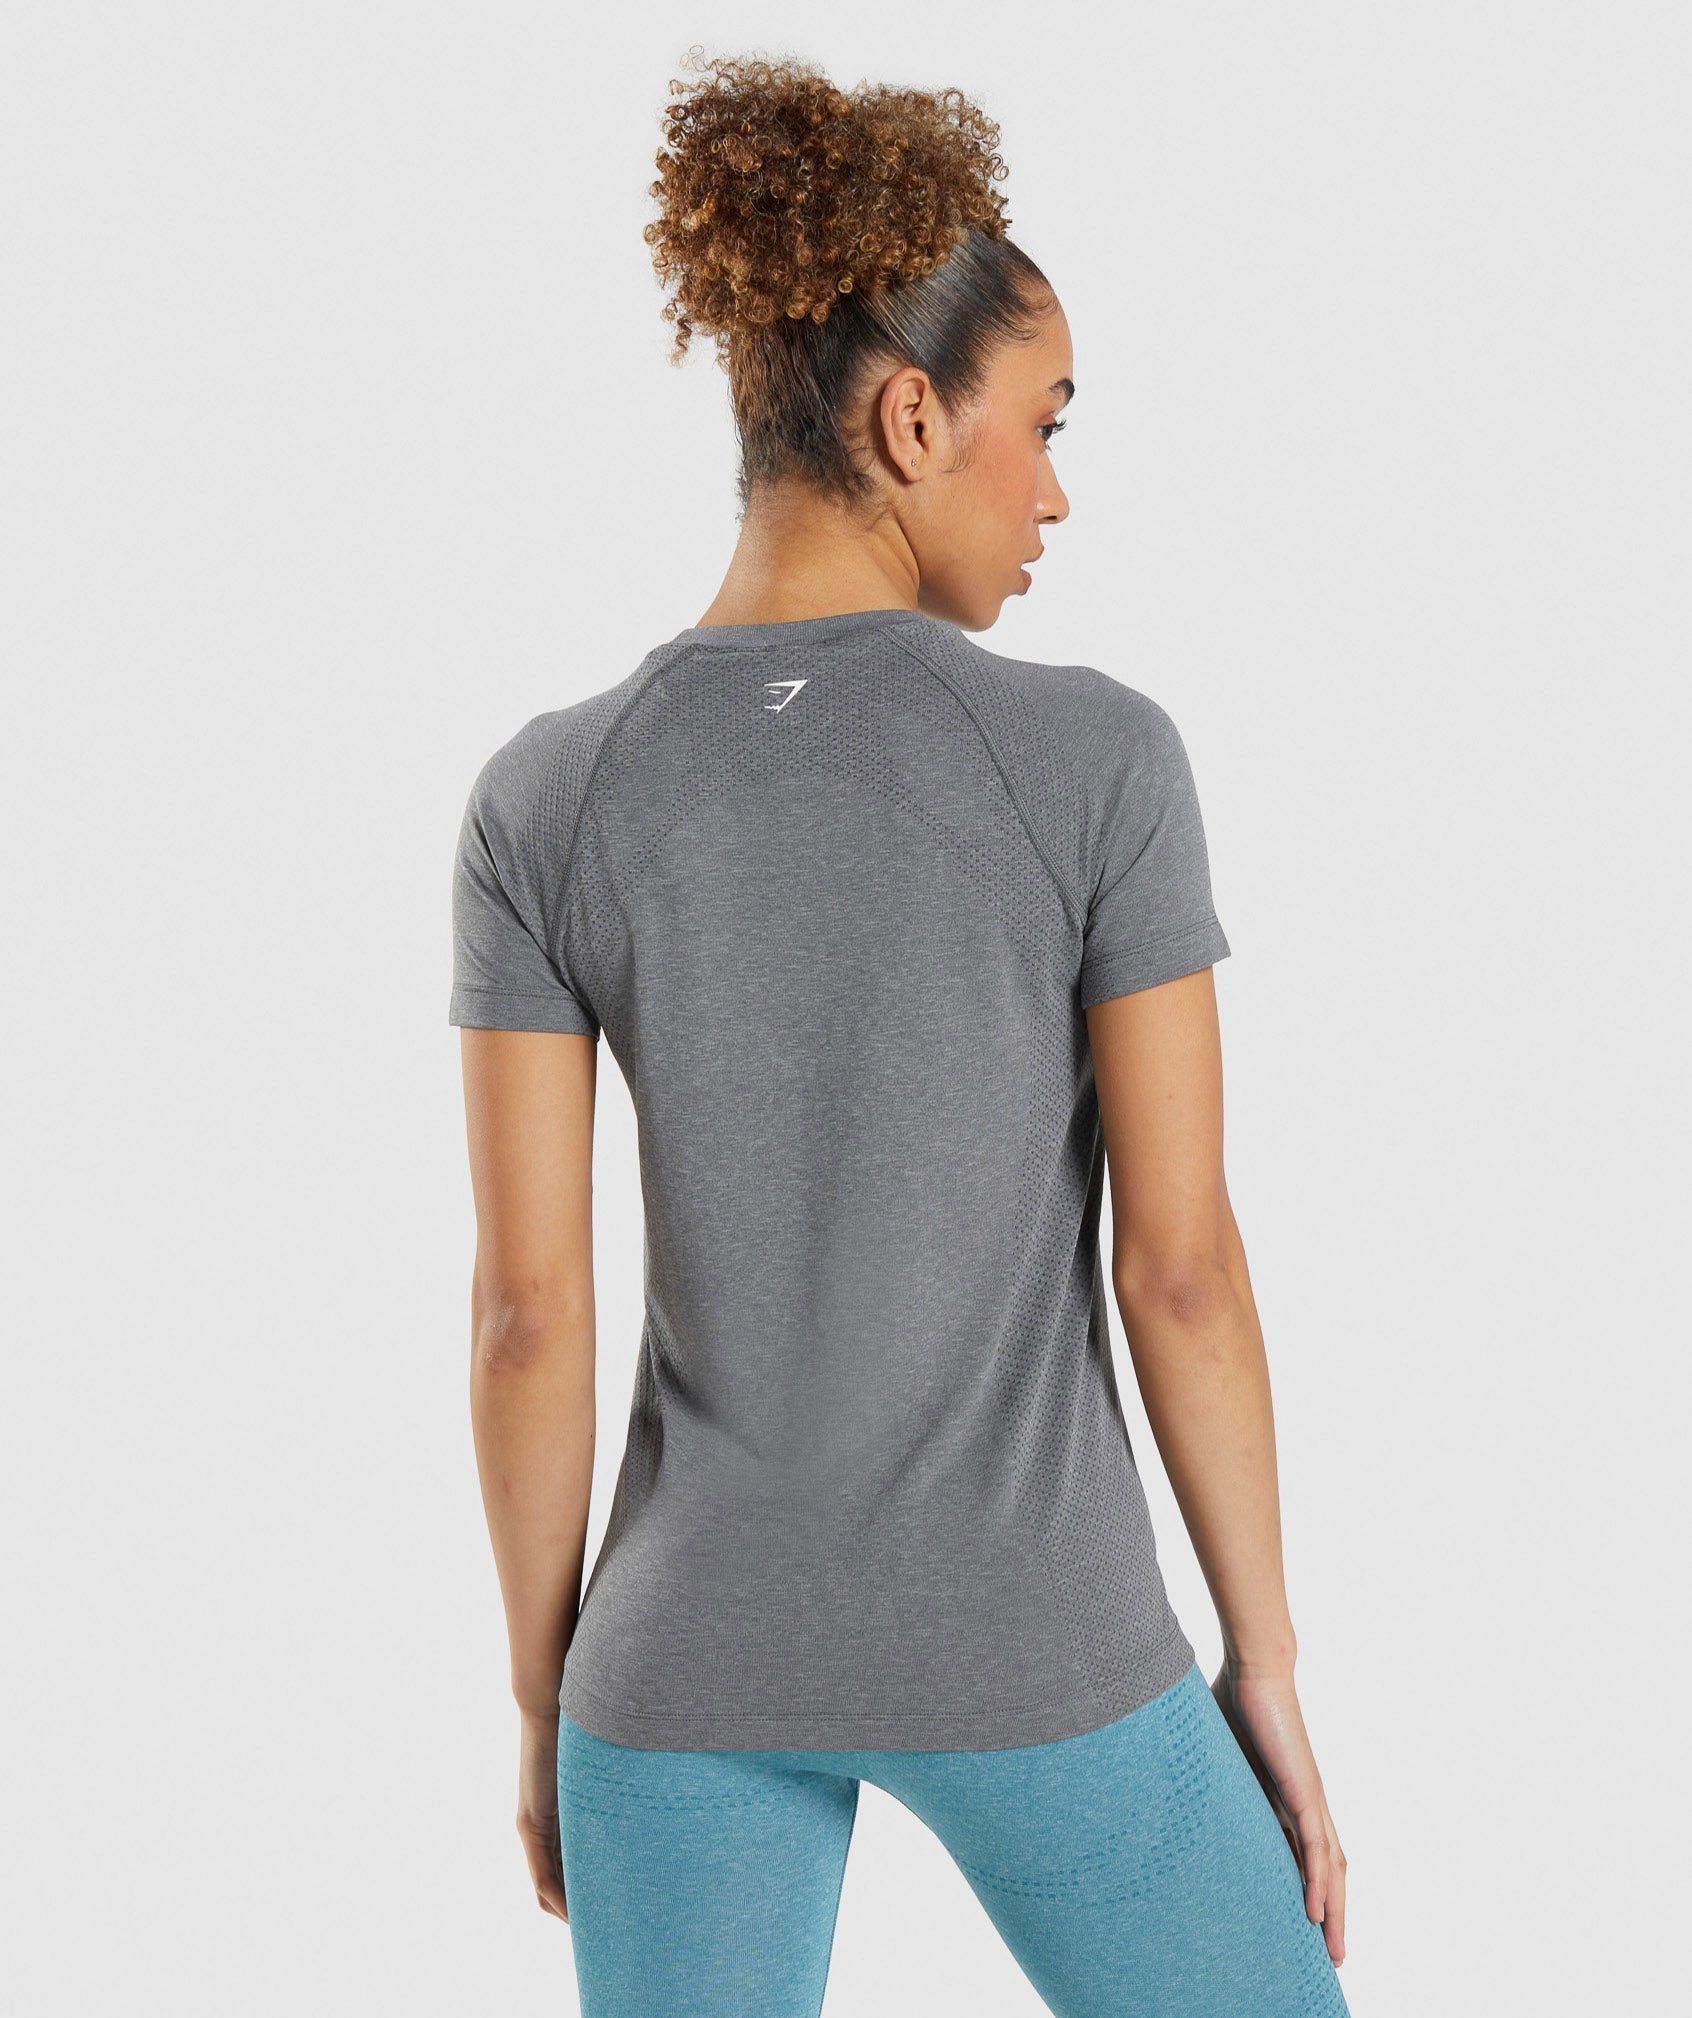 Gymshark Vital Seamless Long Sleeve Gray Size M - $23 (34% Off Retail) -  From Hannah